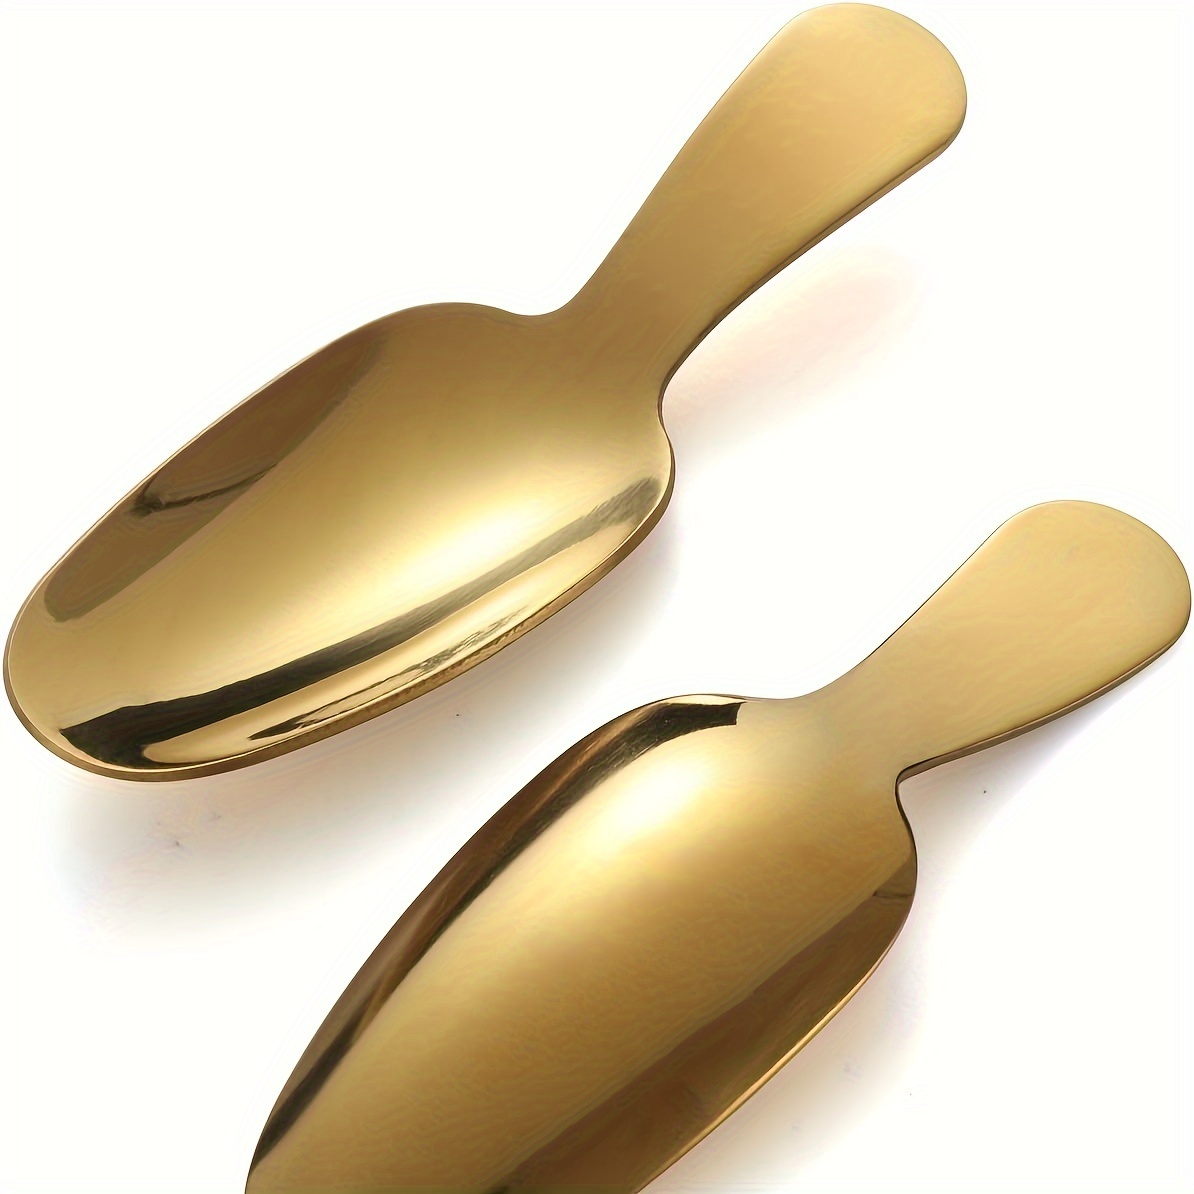 Short Handle Spoons, Small Scoops for Canisters, Mini Gold Spoons, Spice  Jars Spoon for Salt Sugar Condiments Coffee Tea Dessert, 1pc 